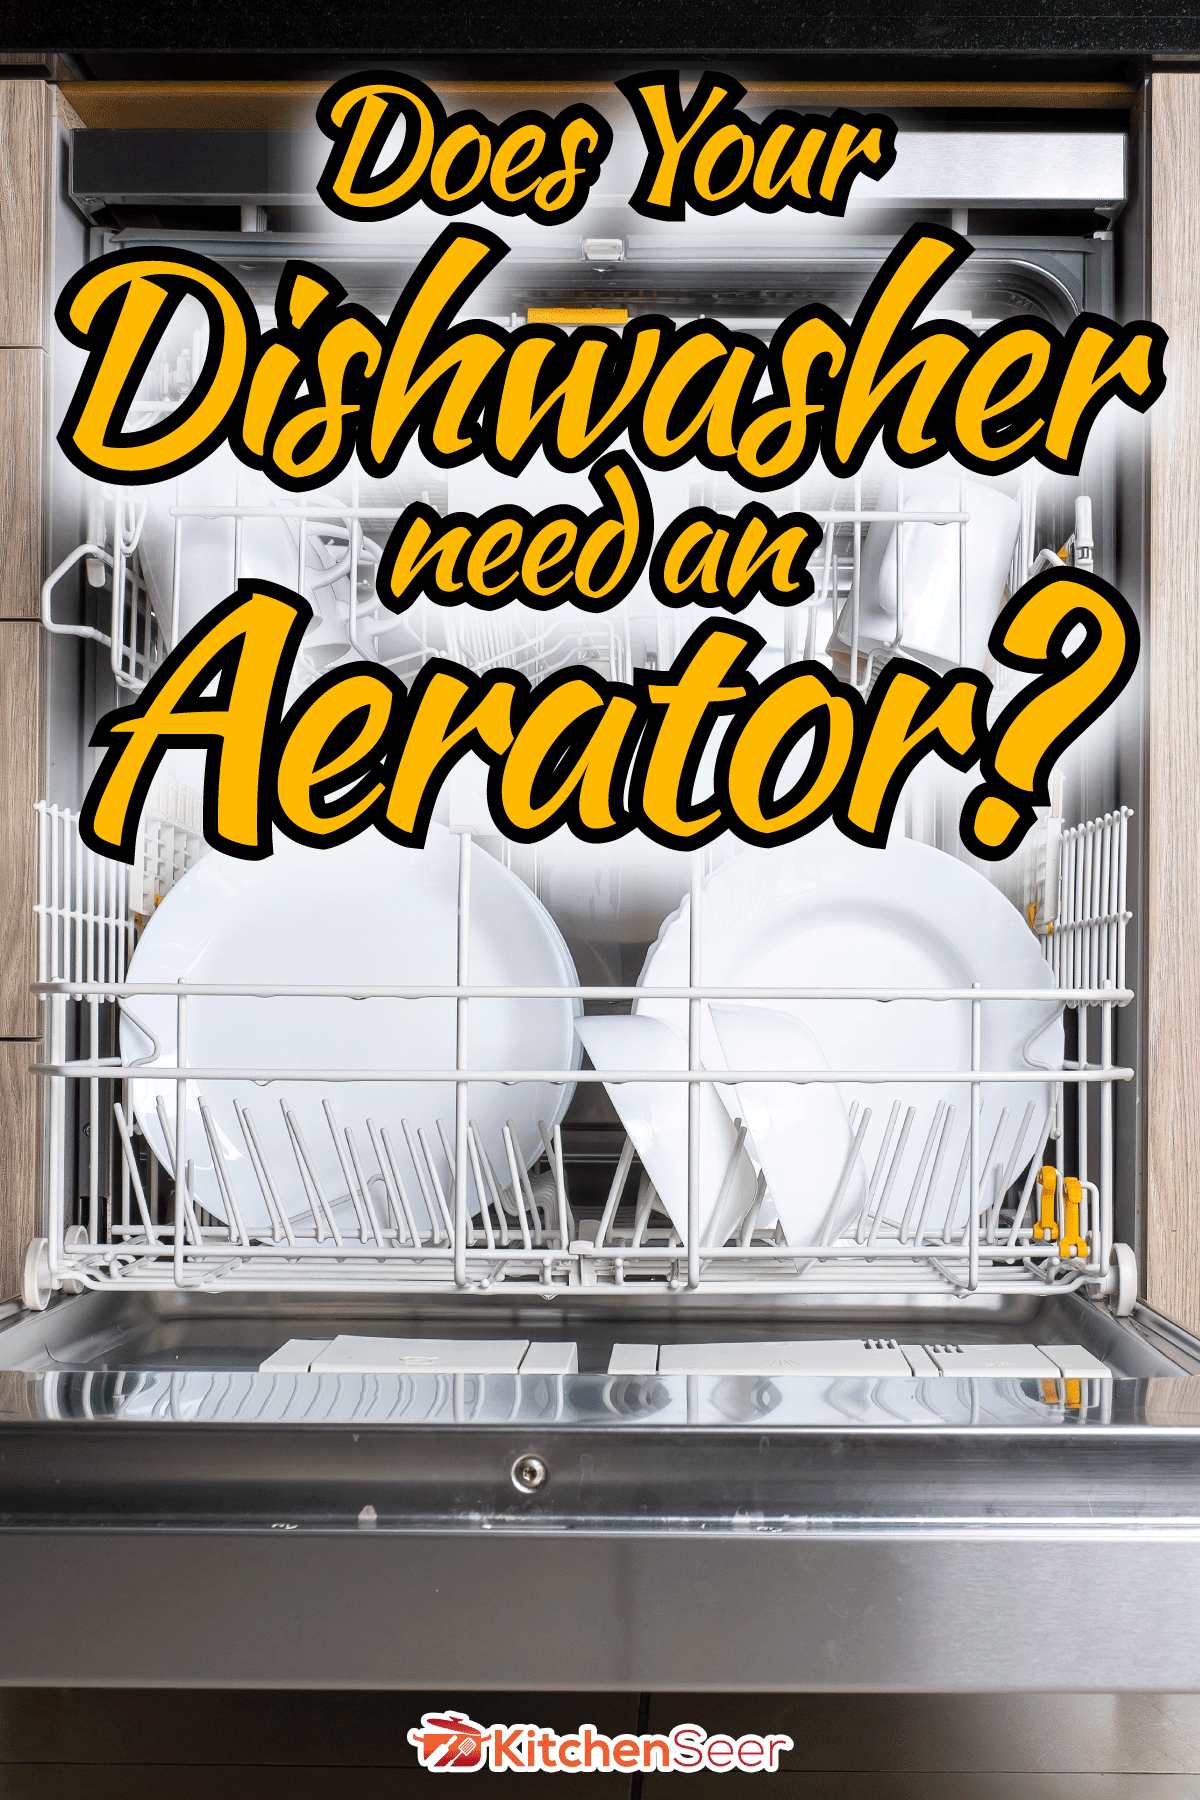 Open door of built-in dishwasher. Kitchen with integrated appliances. Plates and dishes in the dishwasher, Do I Need An Aerator For My Dishwasher?